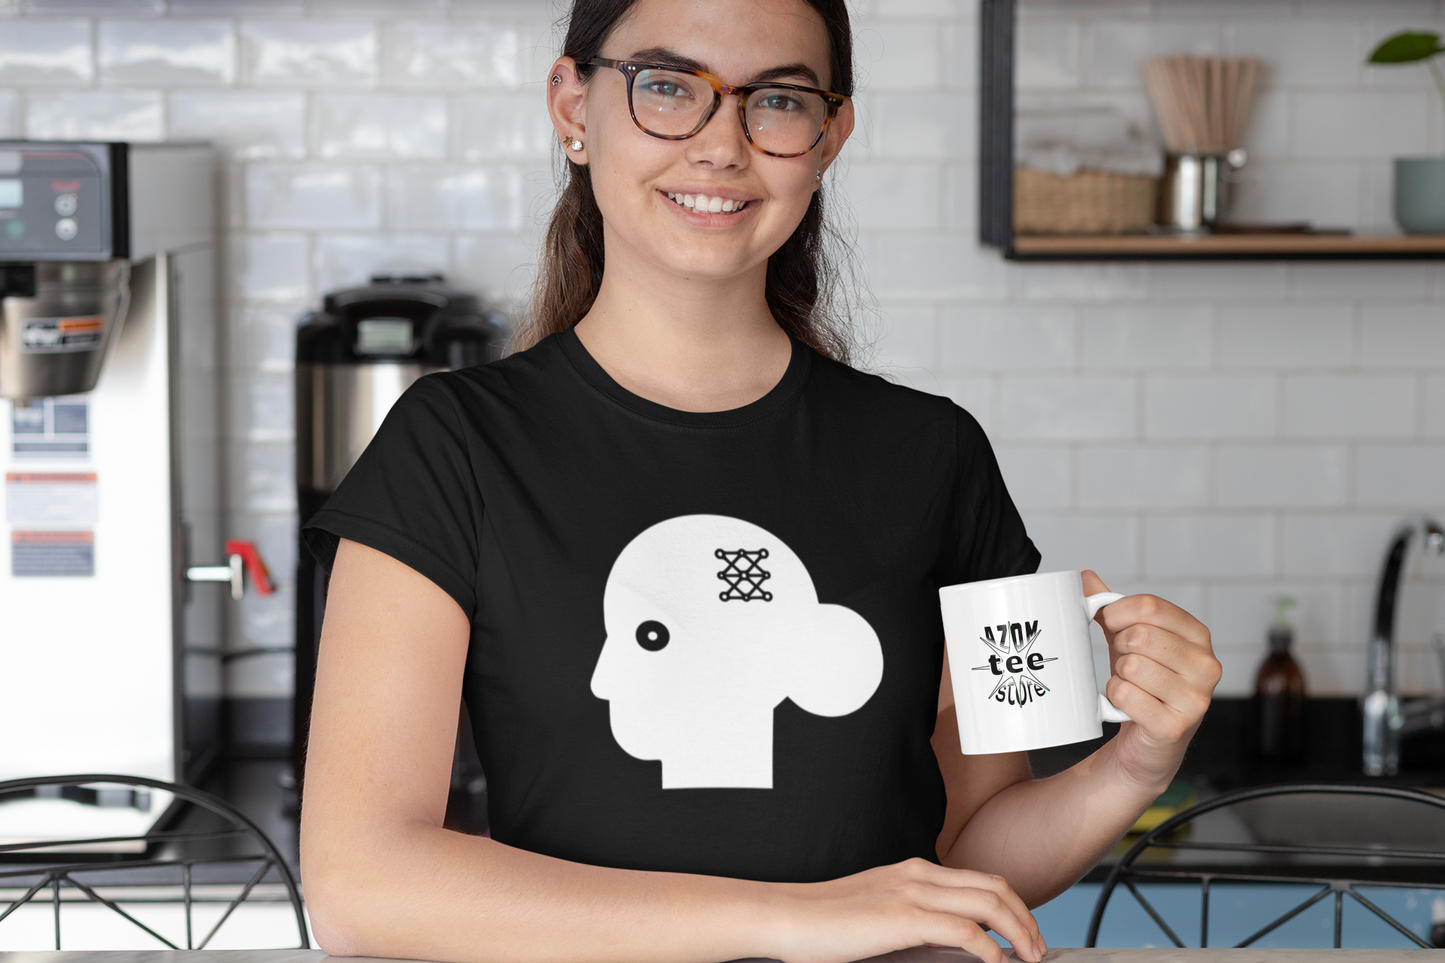 woman wearing a neural network-themed shirt with love"